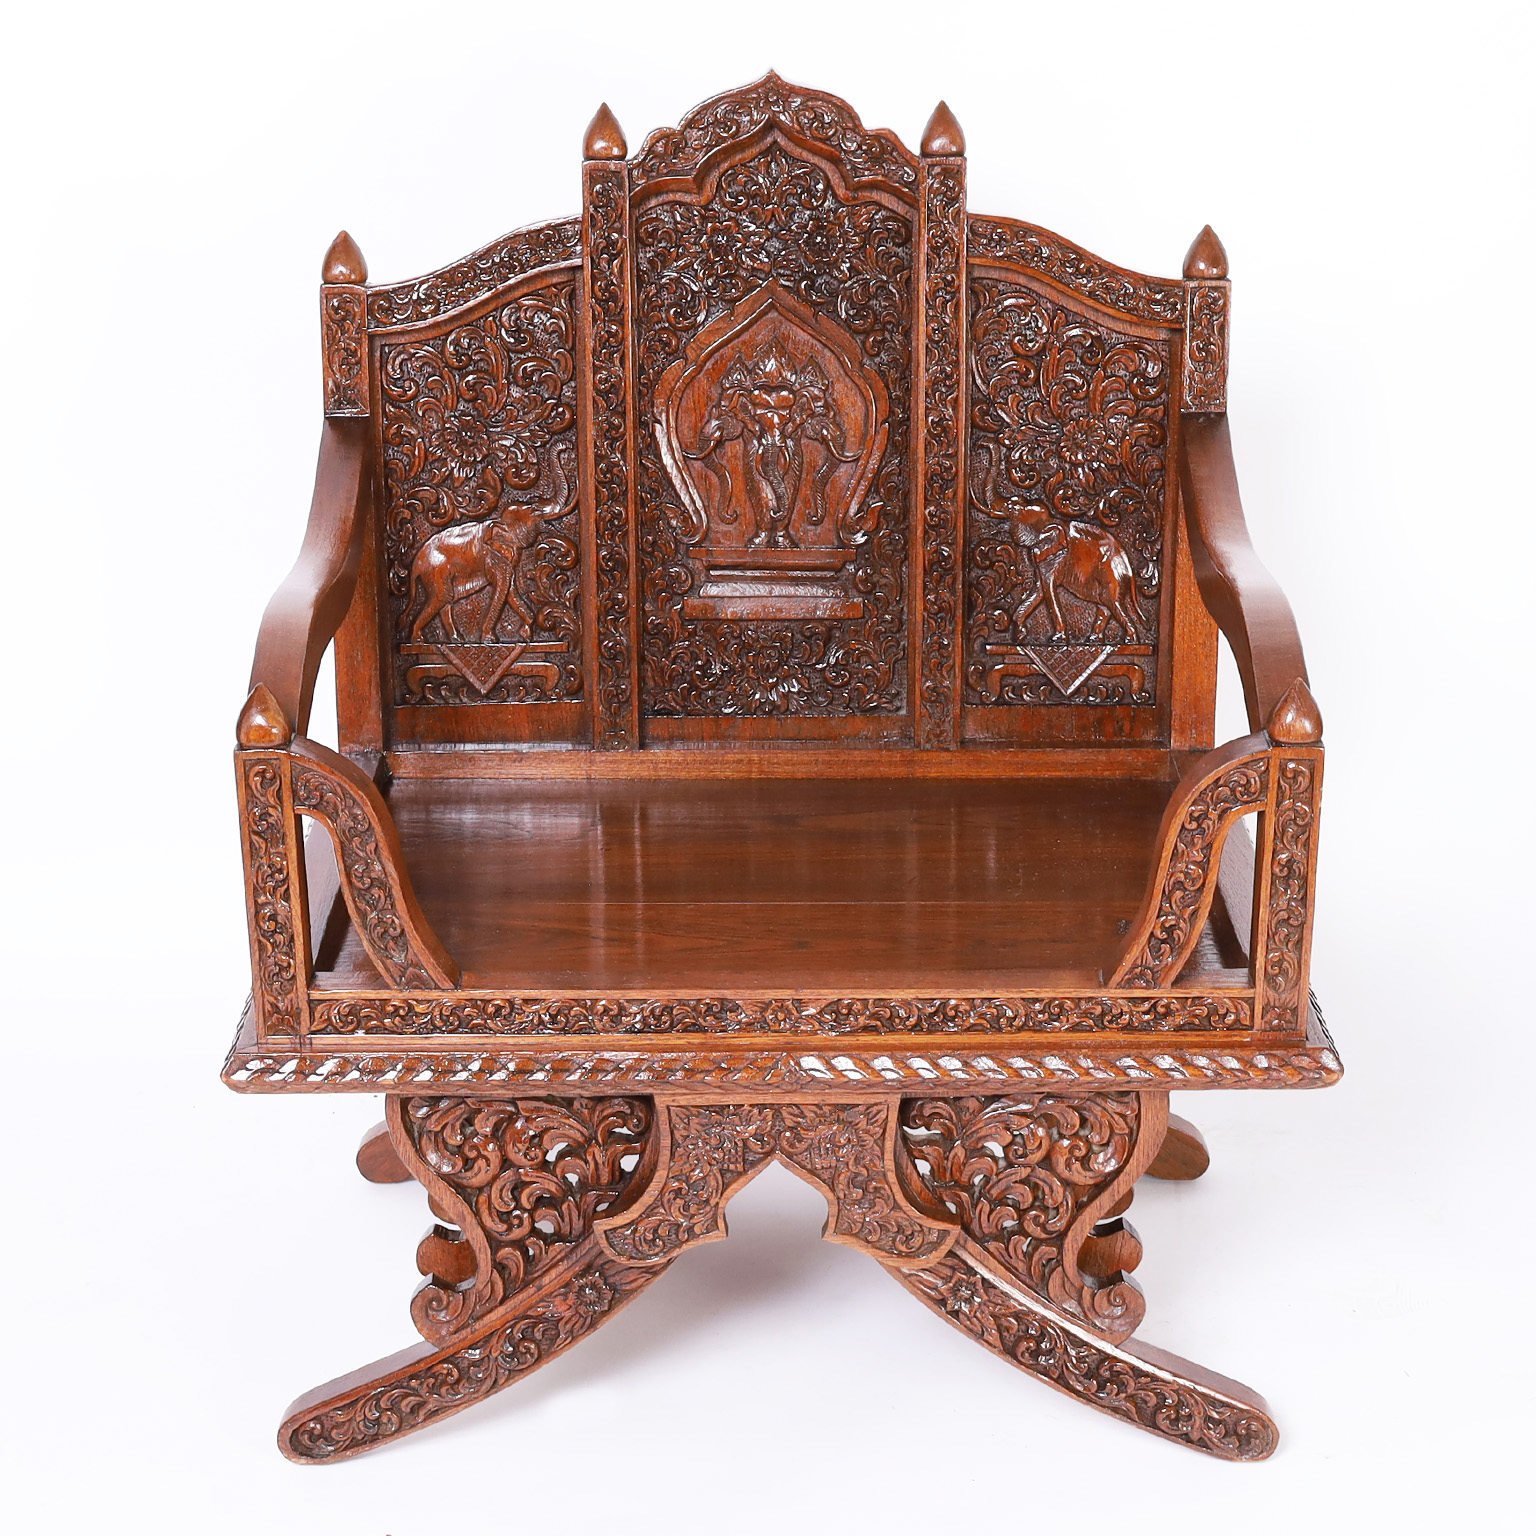 Pair of Antique Thai Rosewood Elephant Saddle Style Chairs